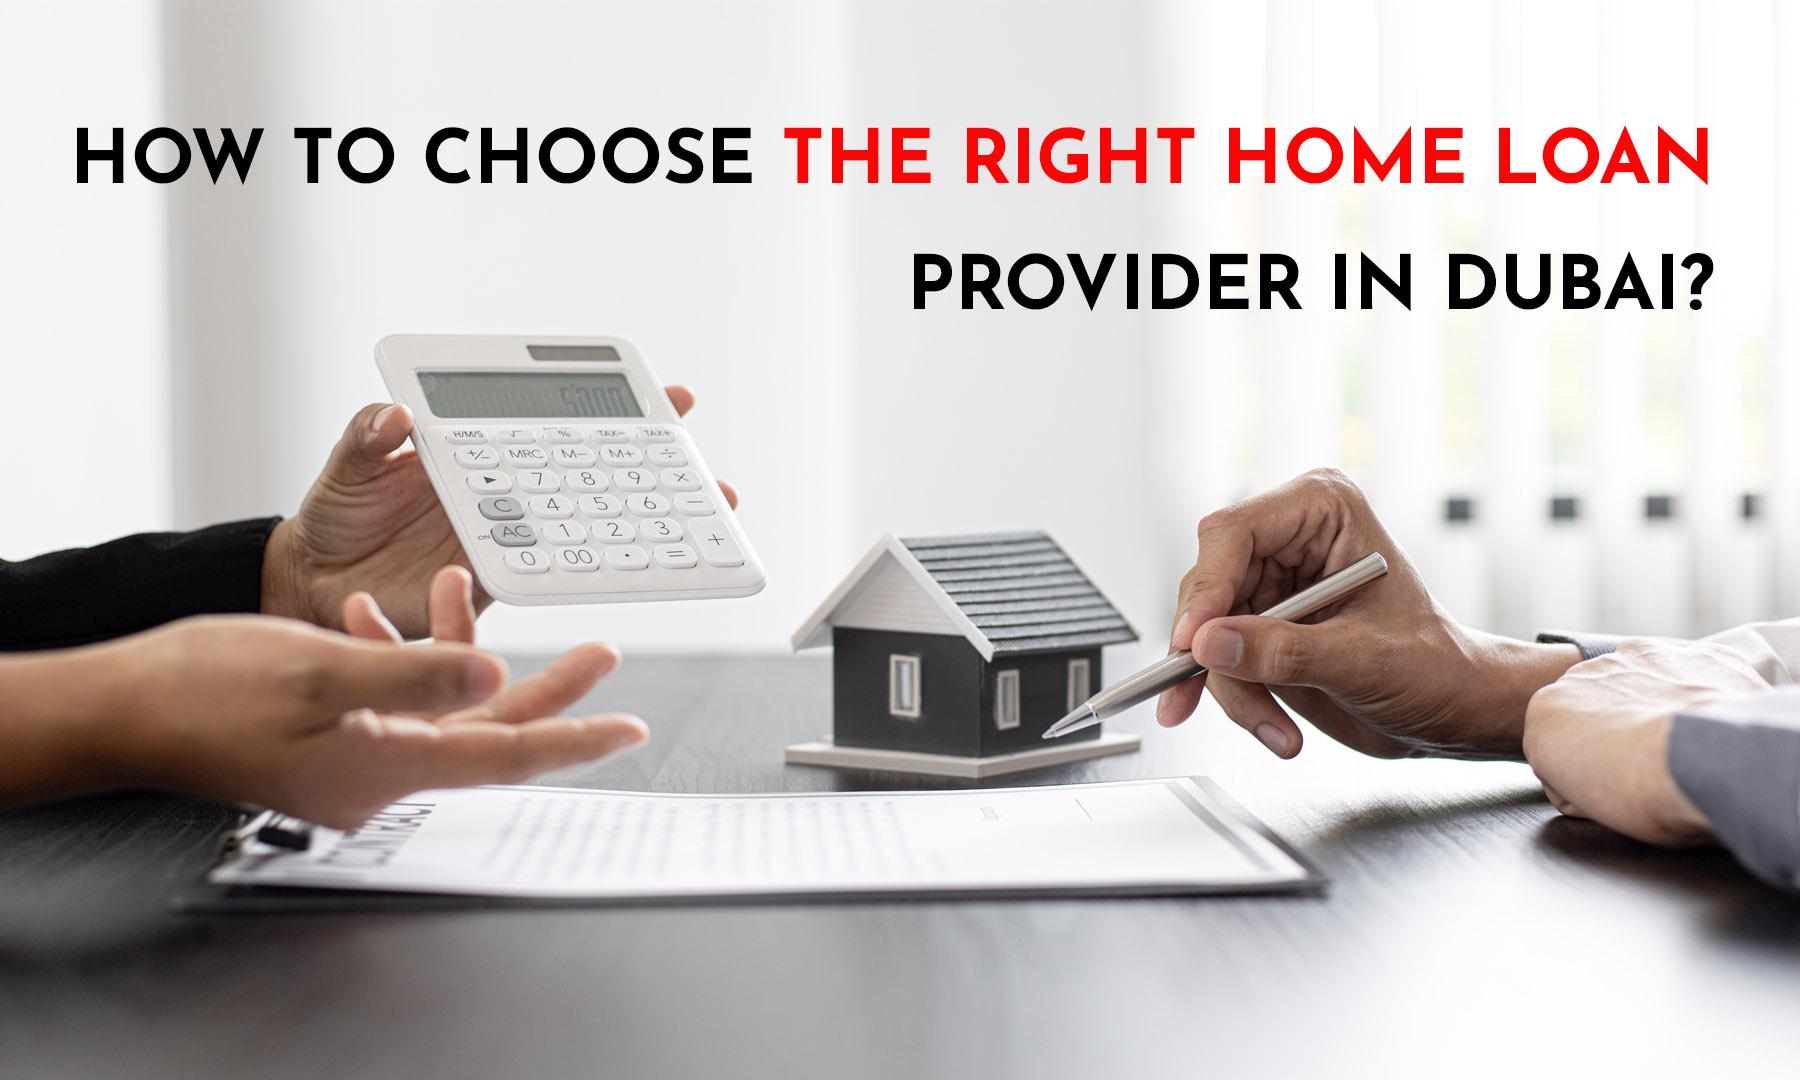 HOW TO CHOOSE THE RIGHT HOME LOAN PROVIDER IN DUBAI?